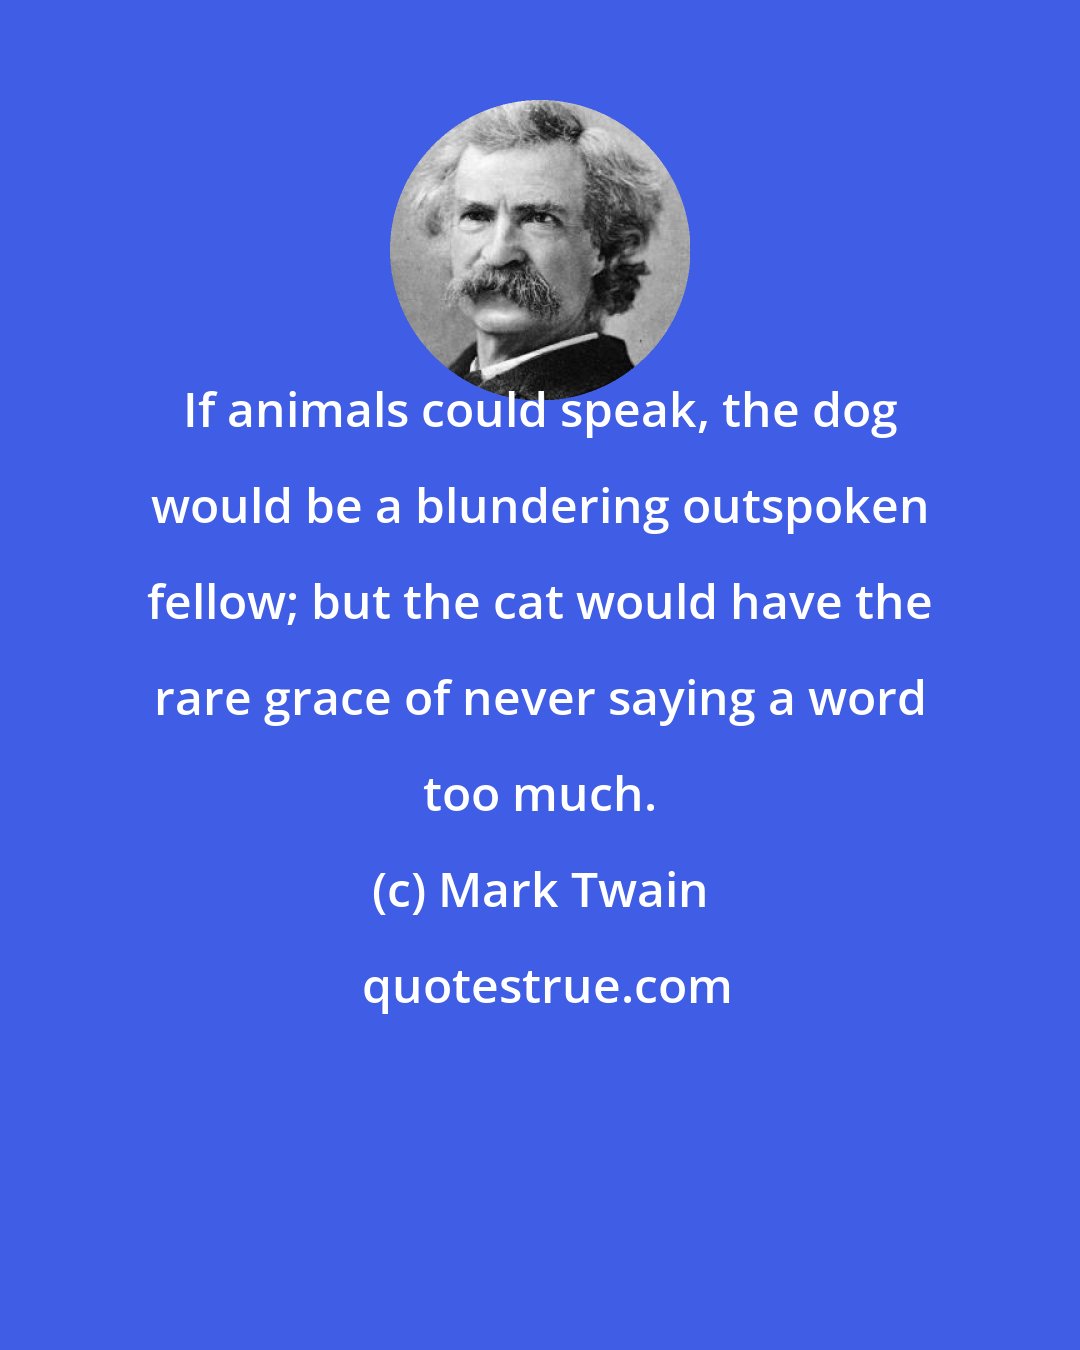 Mark Twain: If animals could speak, the dog would be a blundering outspoken fellow; but the cat would have the rare grace of never saying a word too much.